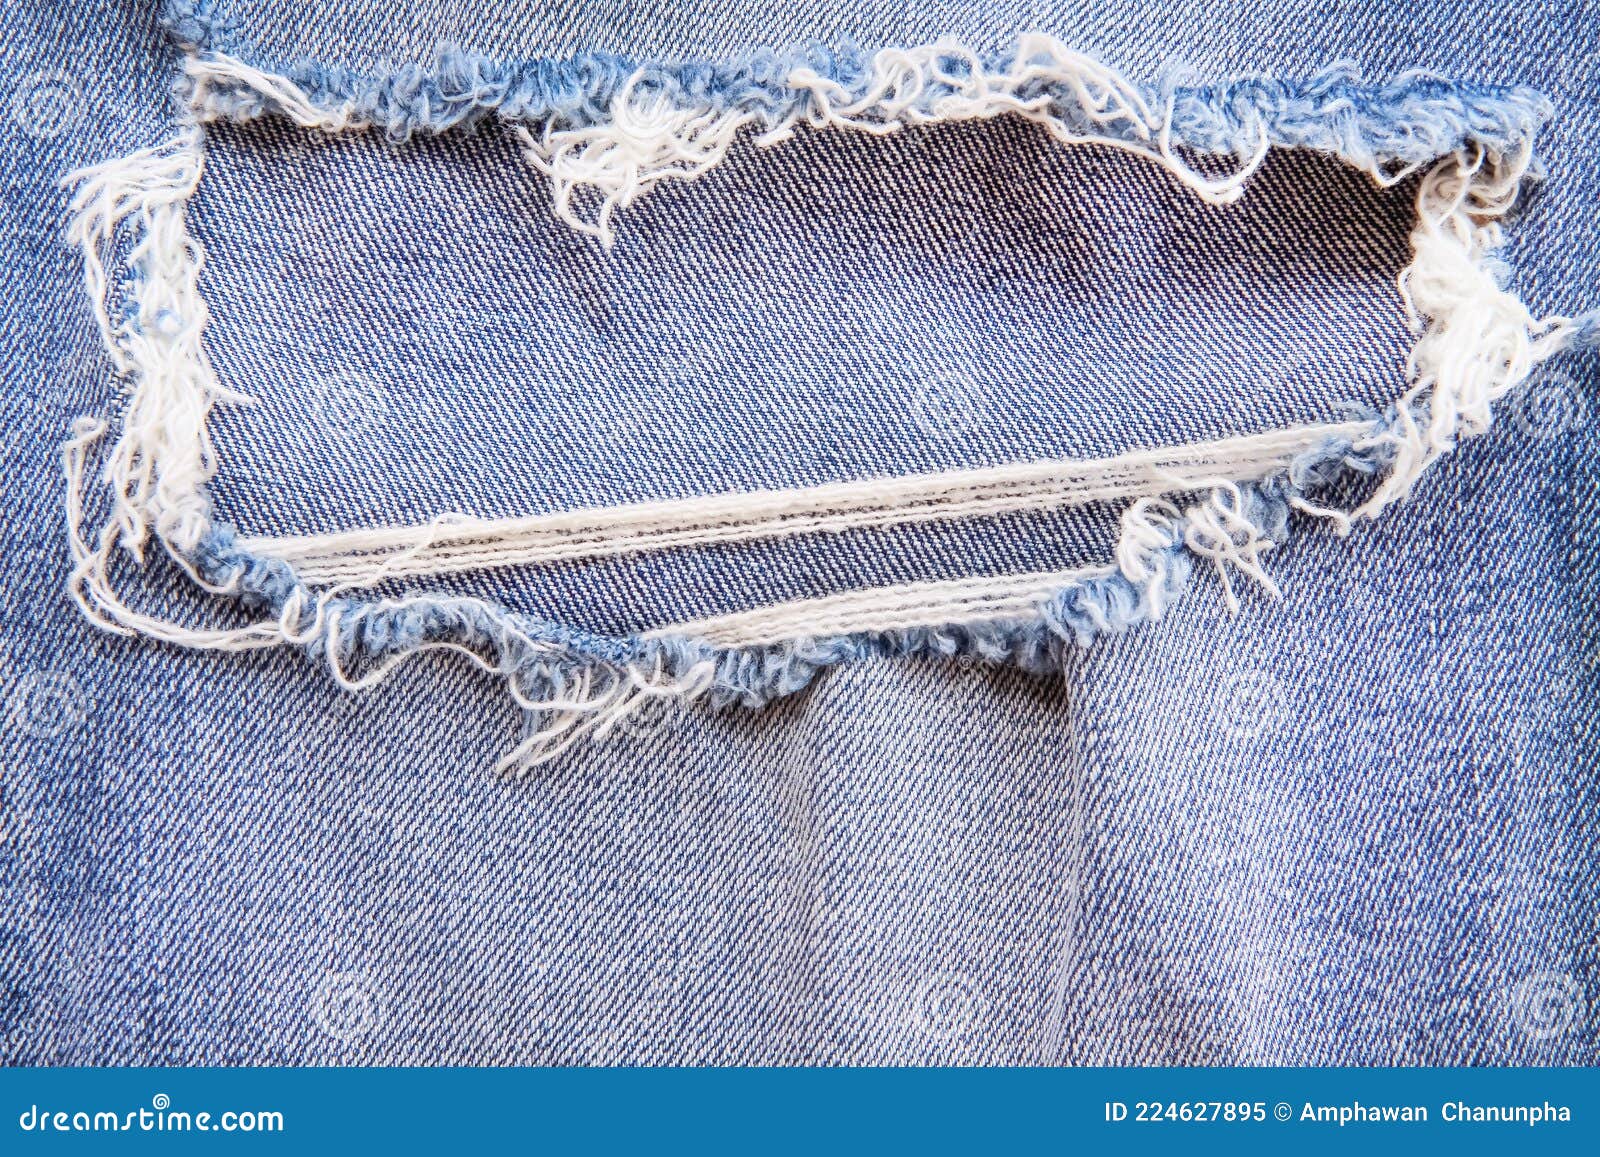 Denim Texture with Ripped Patterns Abstract for Background Stock Image ...